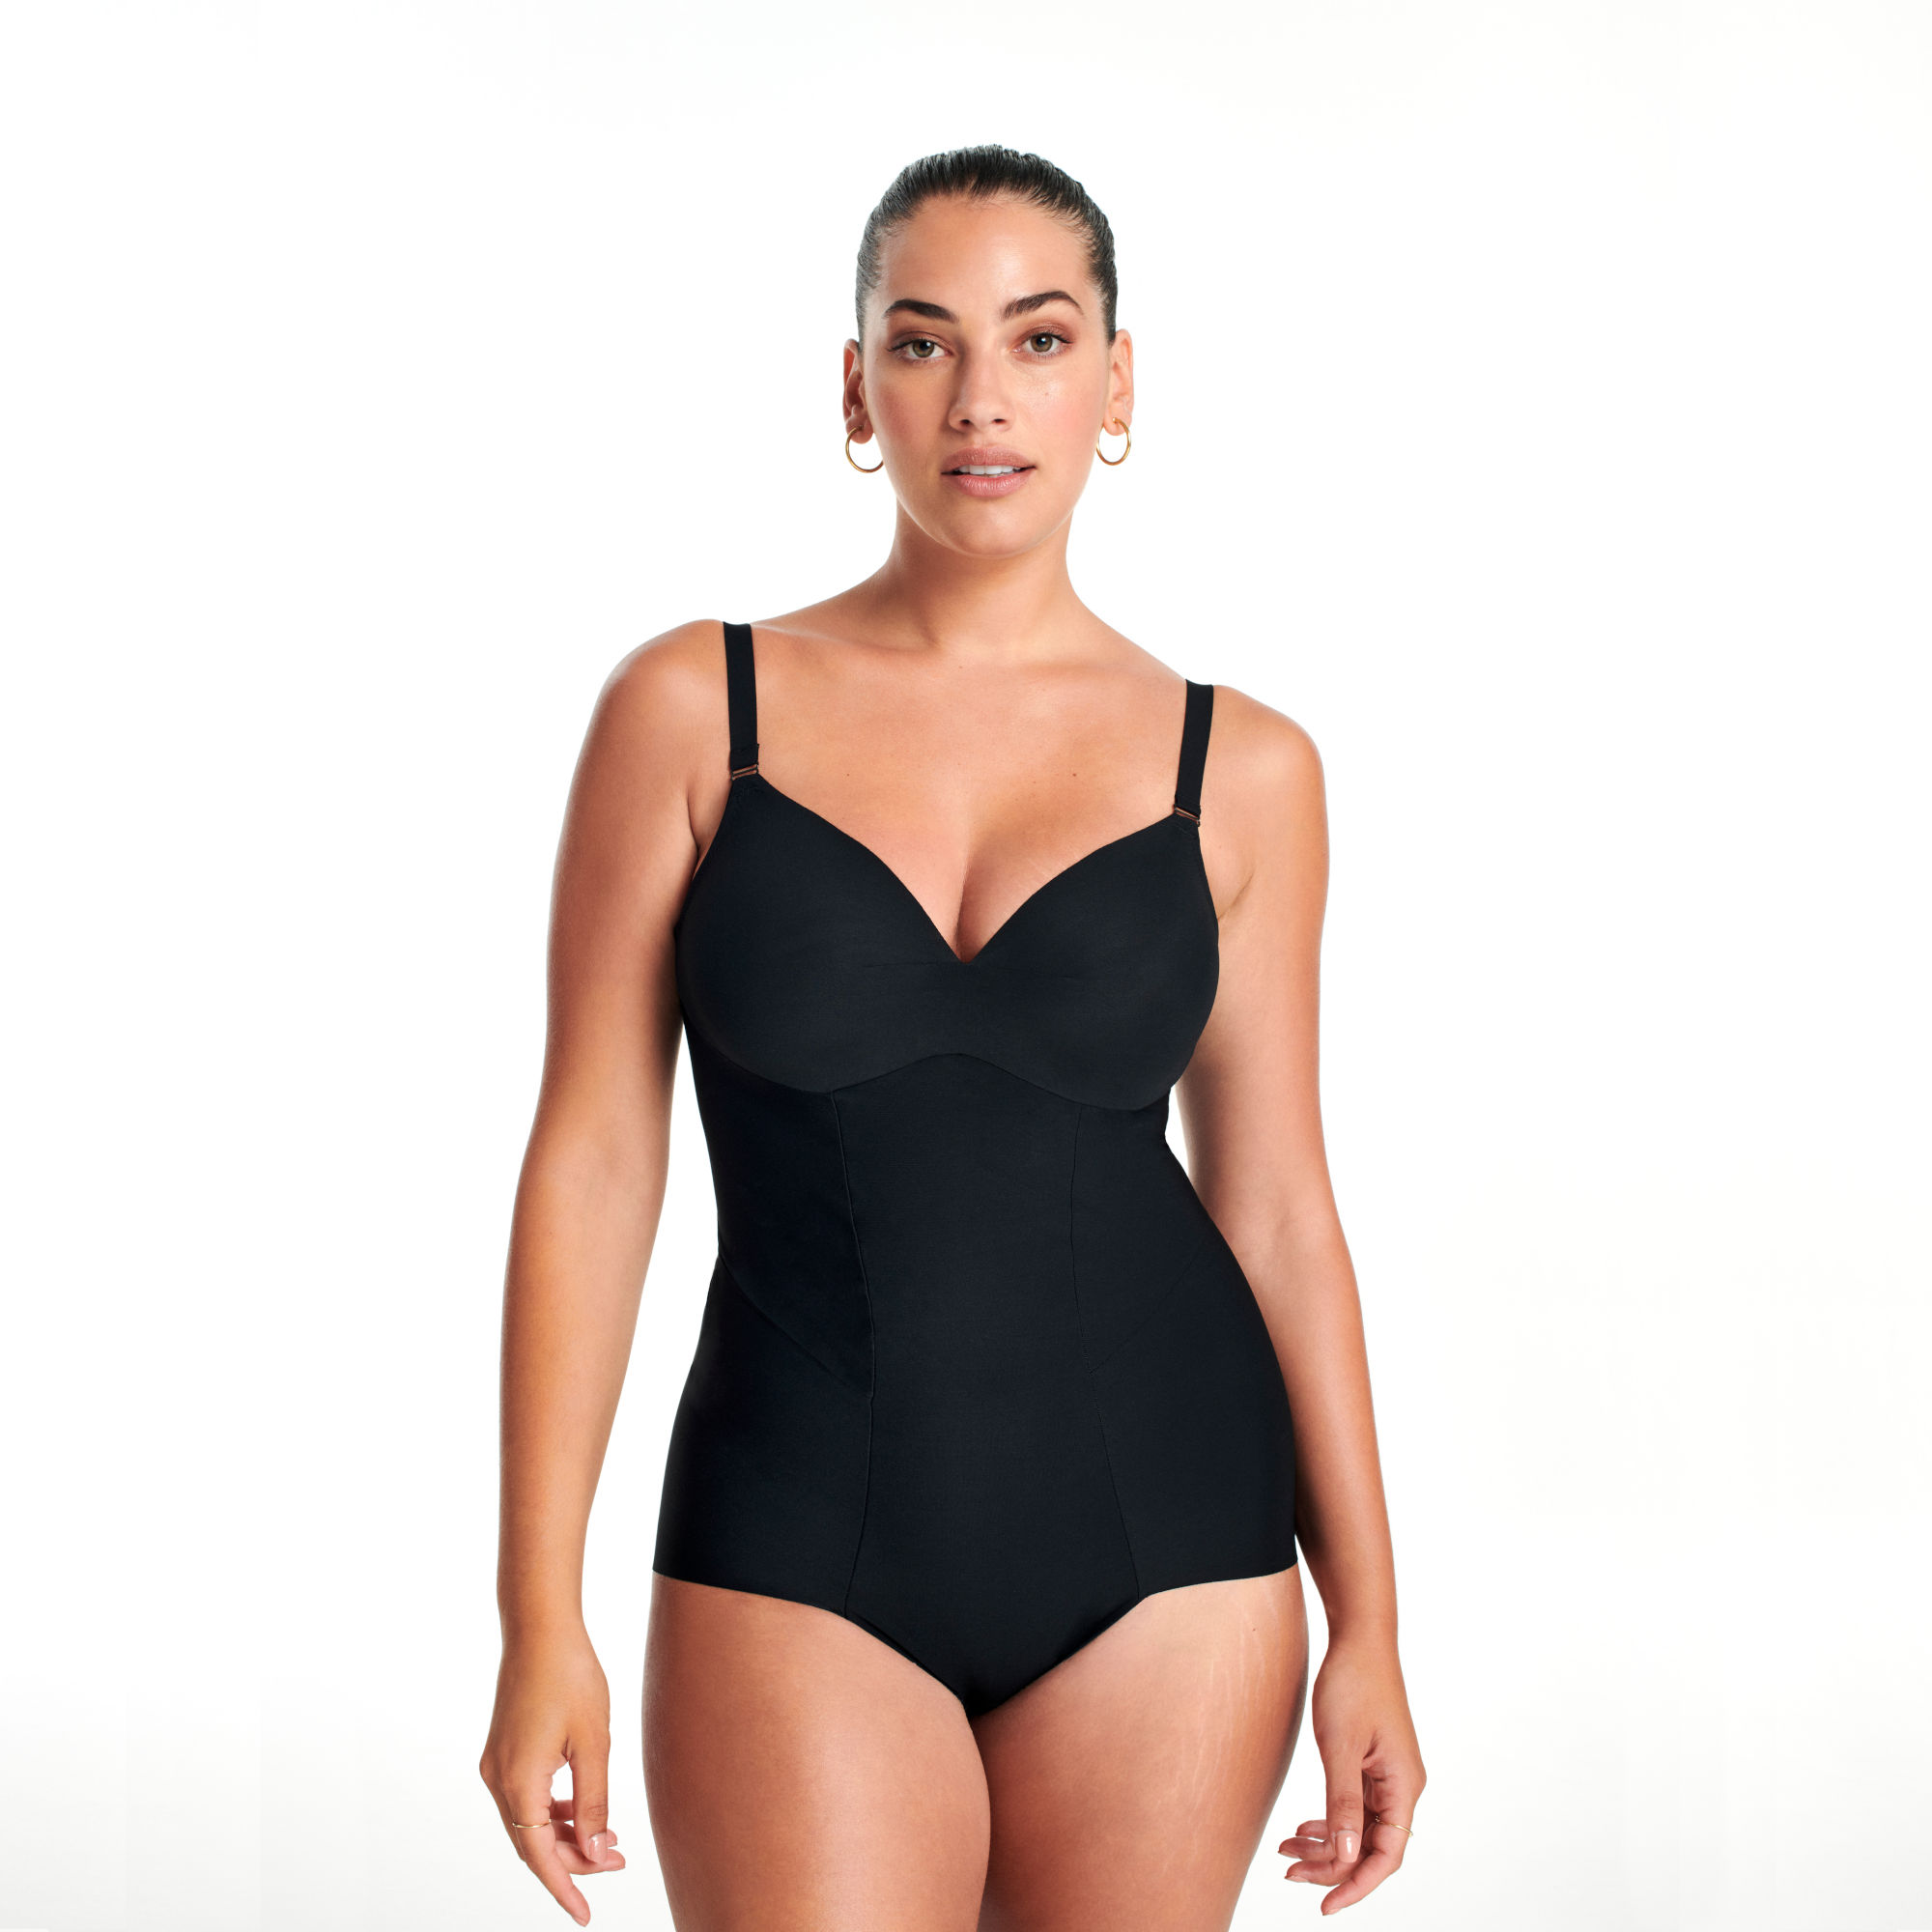 Women's intimate bodysuits and corsets: women's bodysuits, bodices and  corsets to enhance femininity - Yamamay